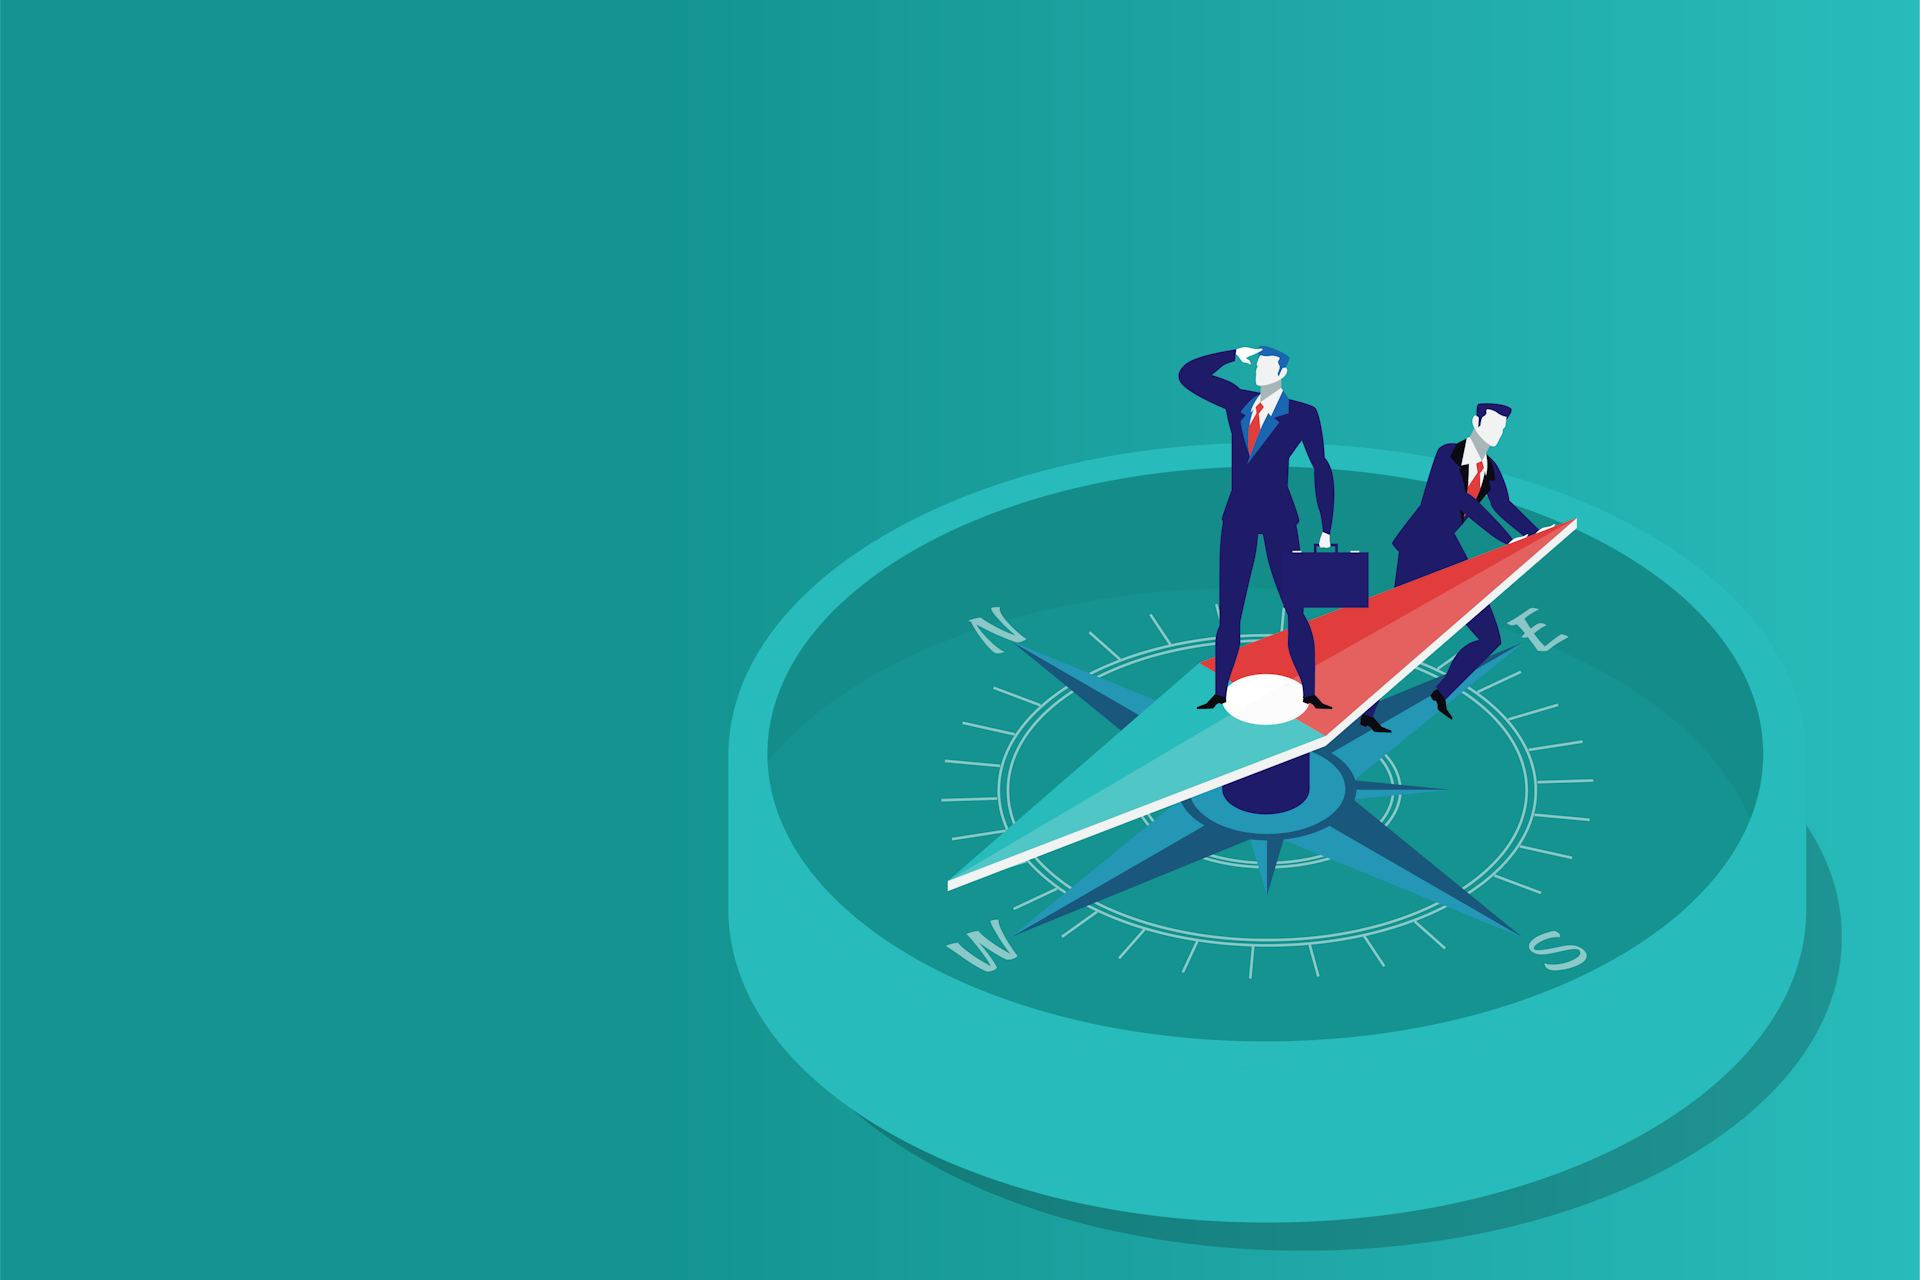 Illustration of two businessmen standing on a compass against a teal background